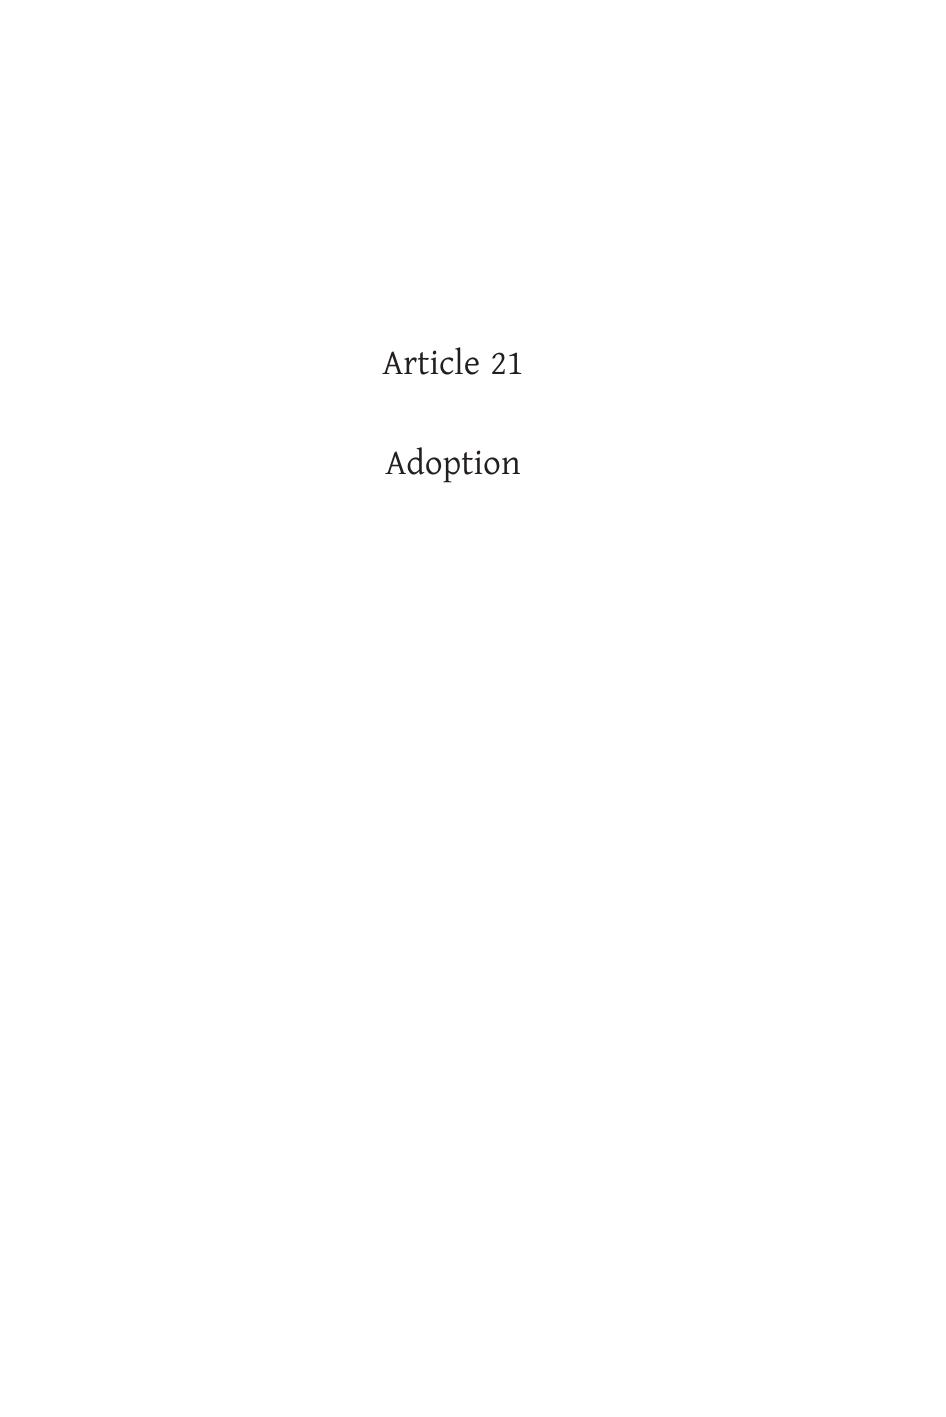 A Commentary on the United Nations Convention on the Rights of the Child, Article 21: Adoption by Sylvain Vité; Hervé Boéchat